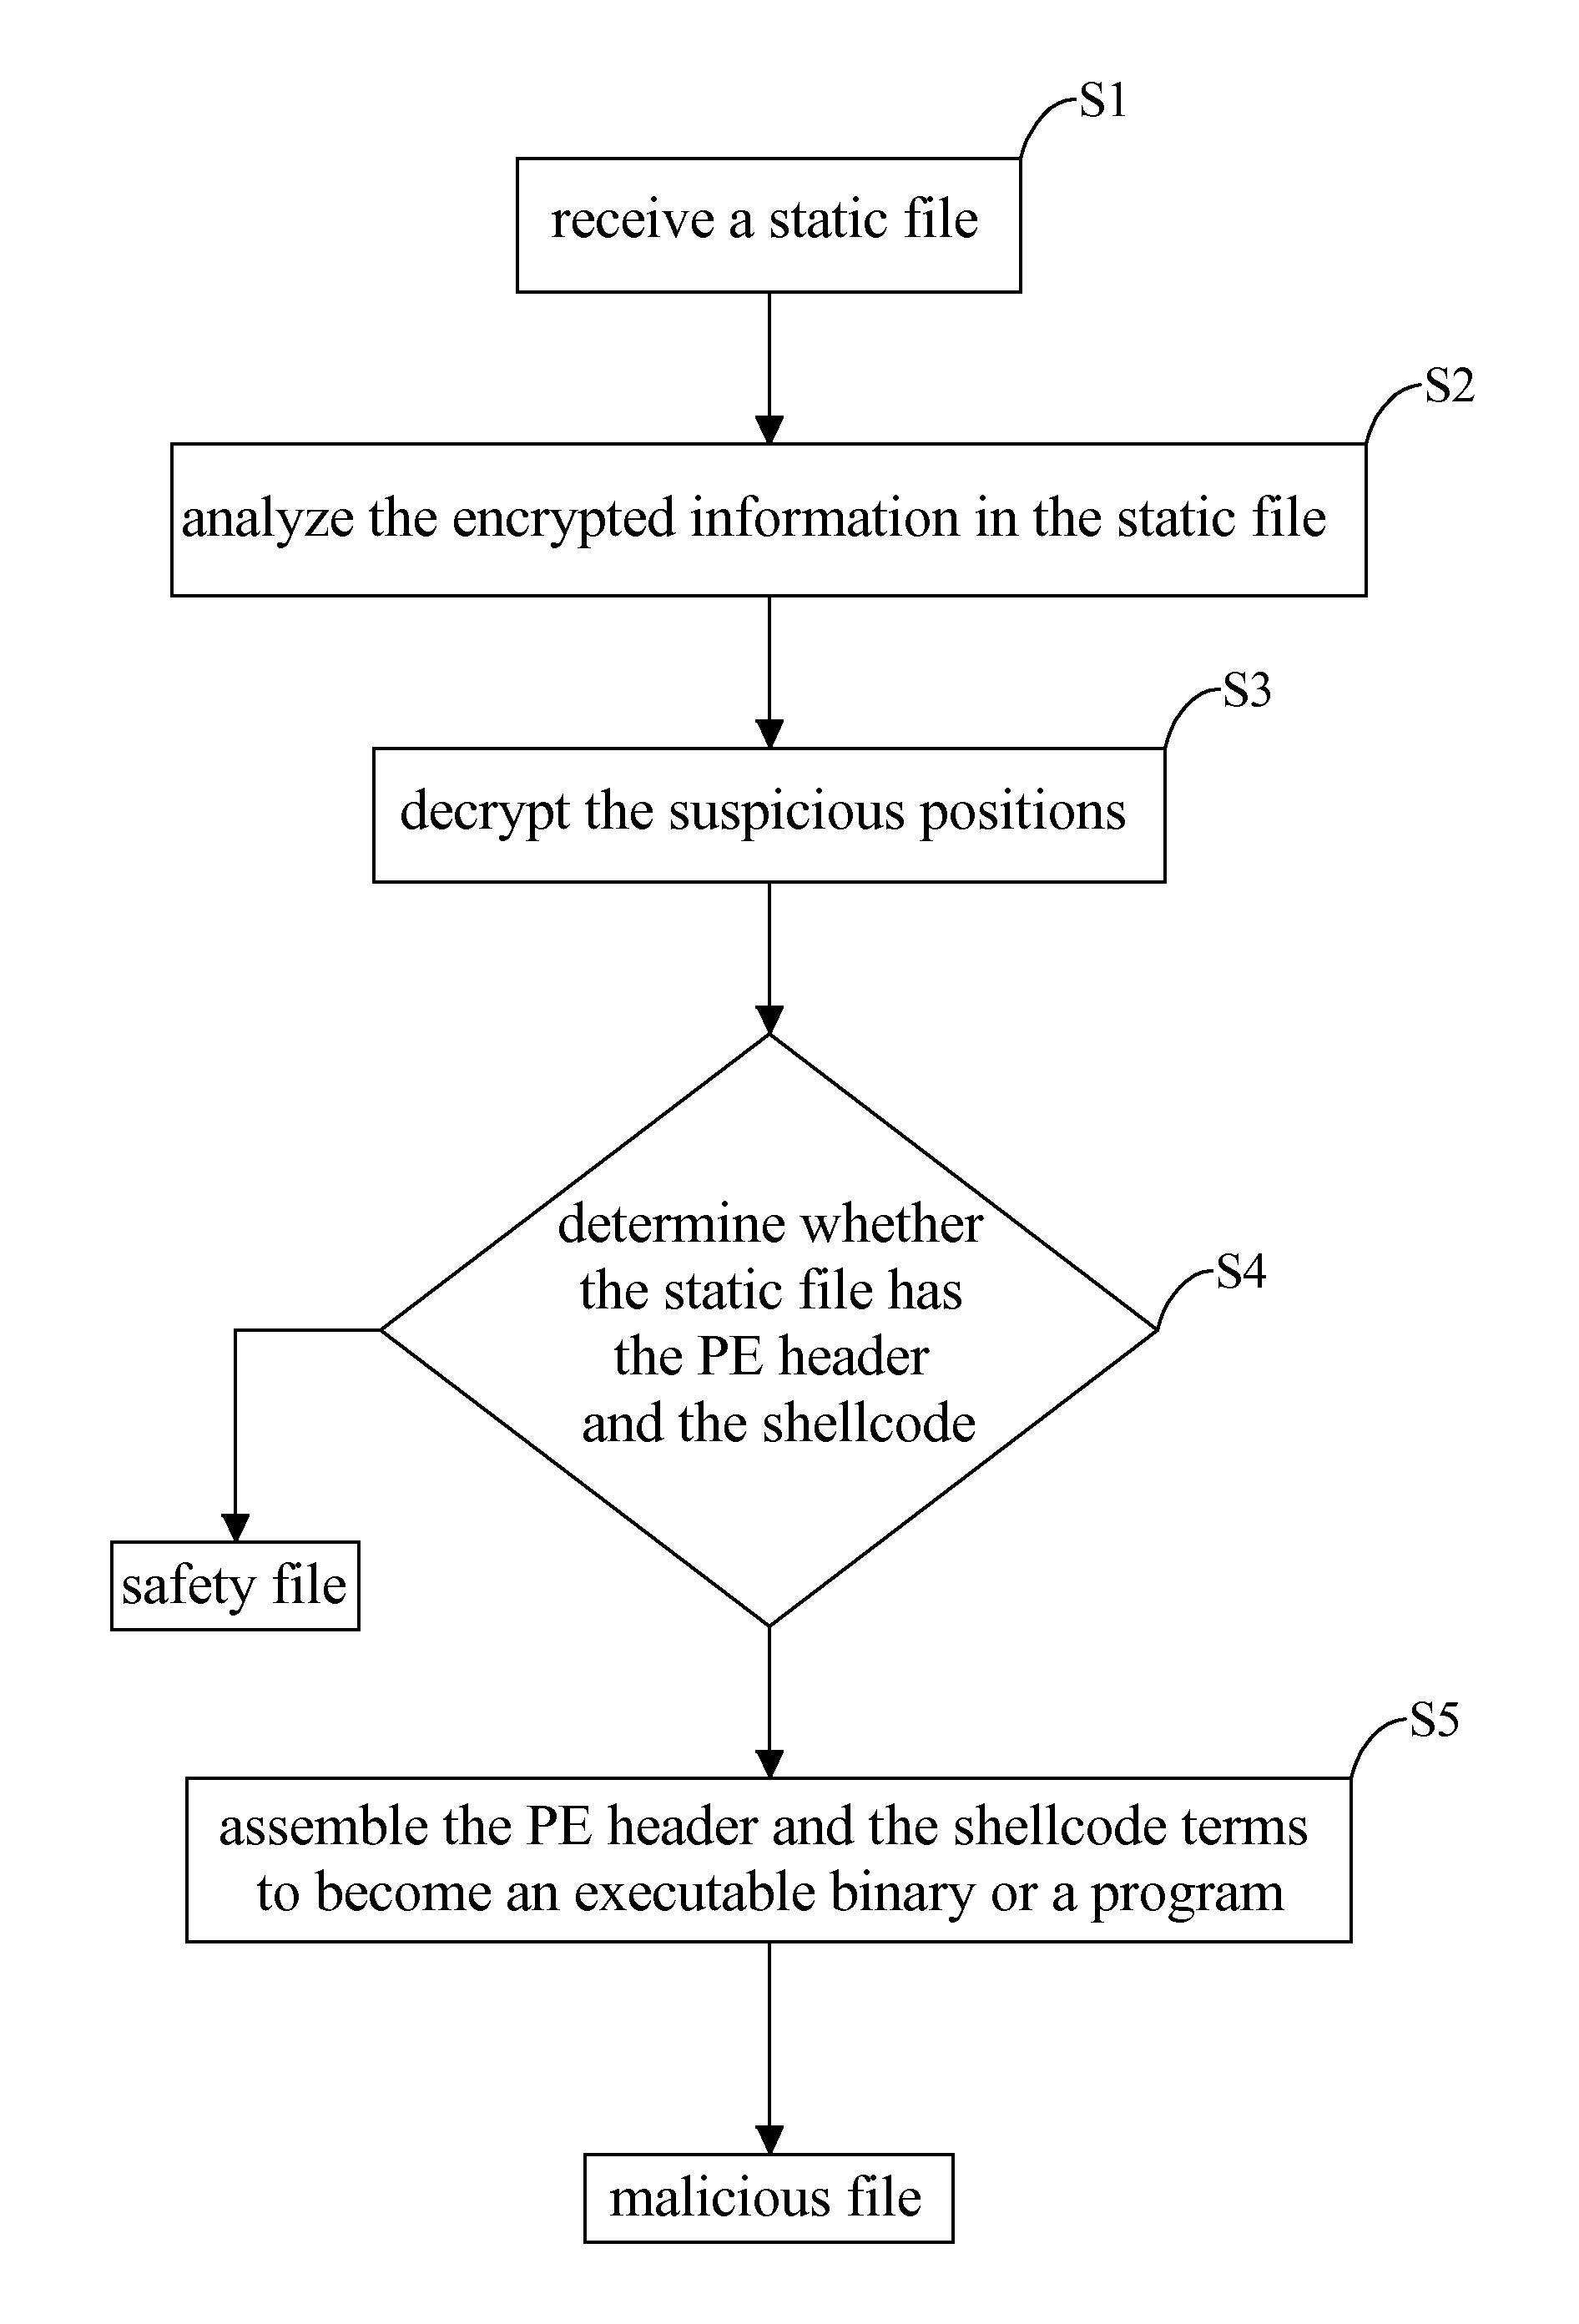 Method for recognizing malicious file